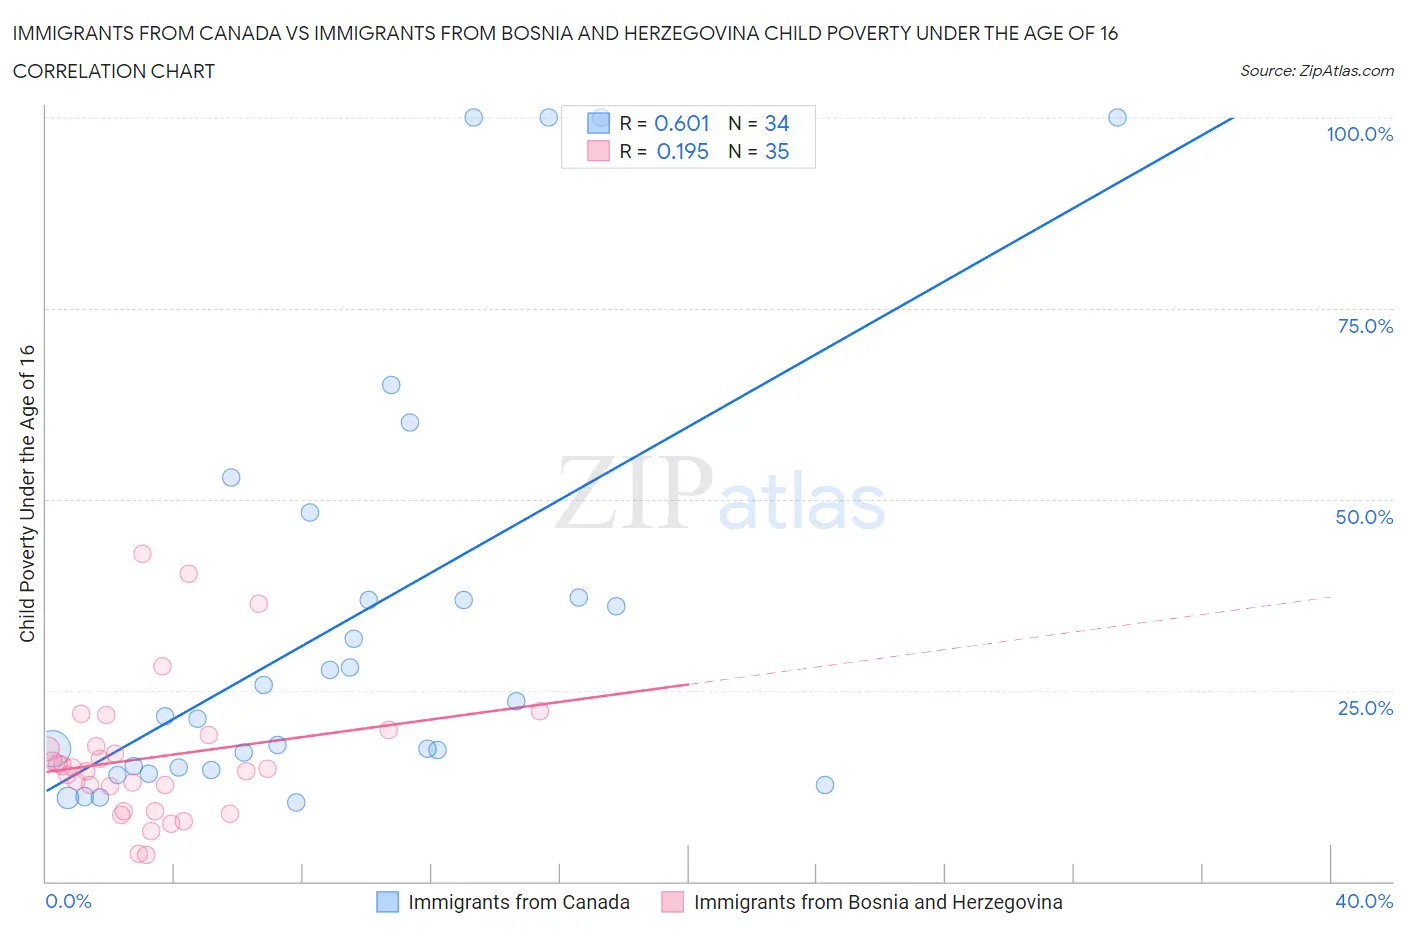 Immigrants from Canada vs Immigrants from Bosnia and Herzegovina Child Poverty Under the Age of 16